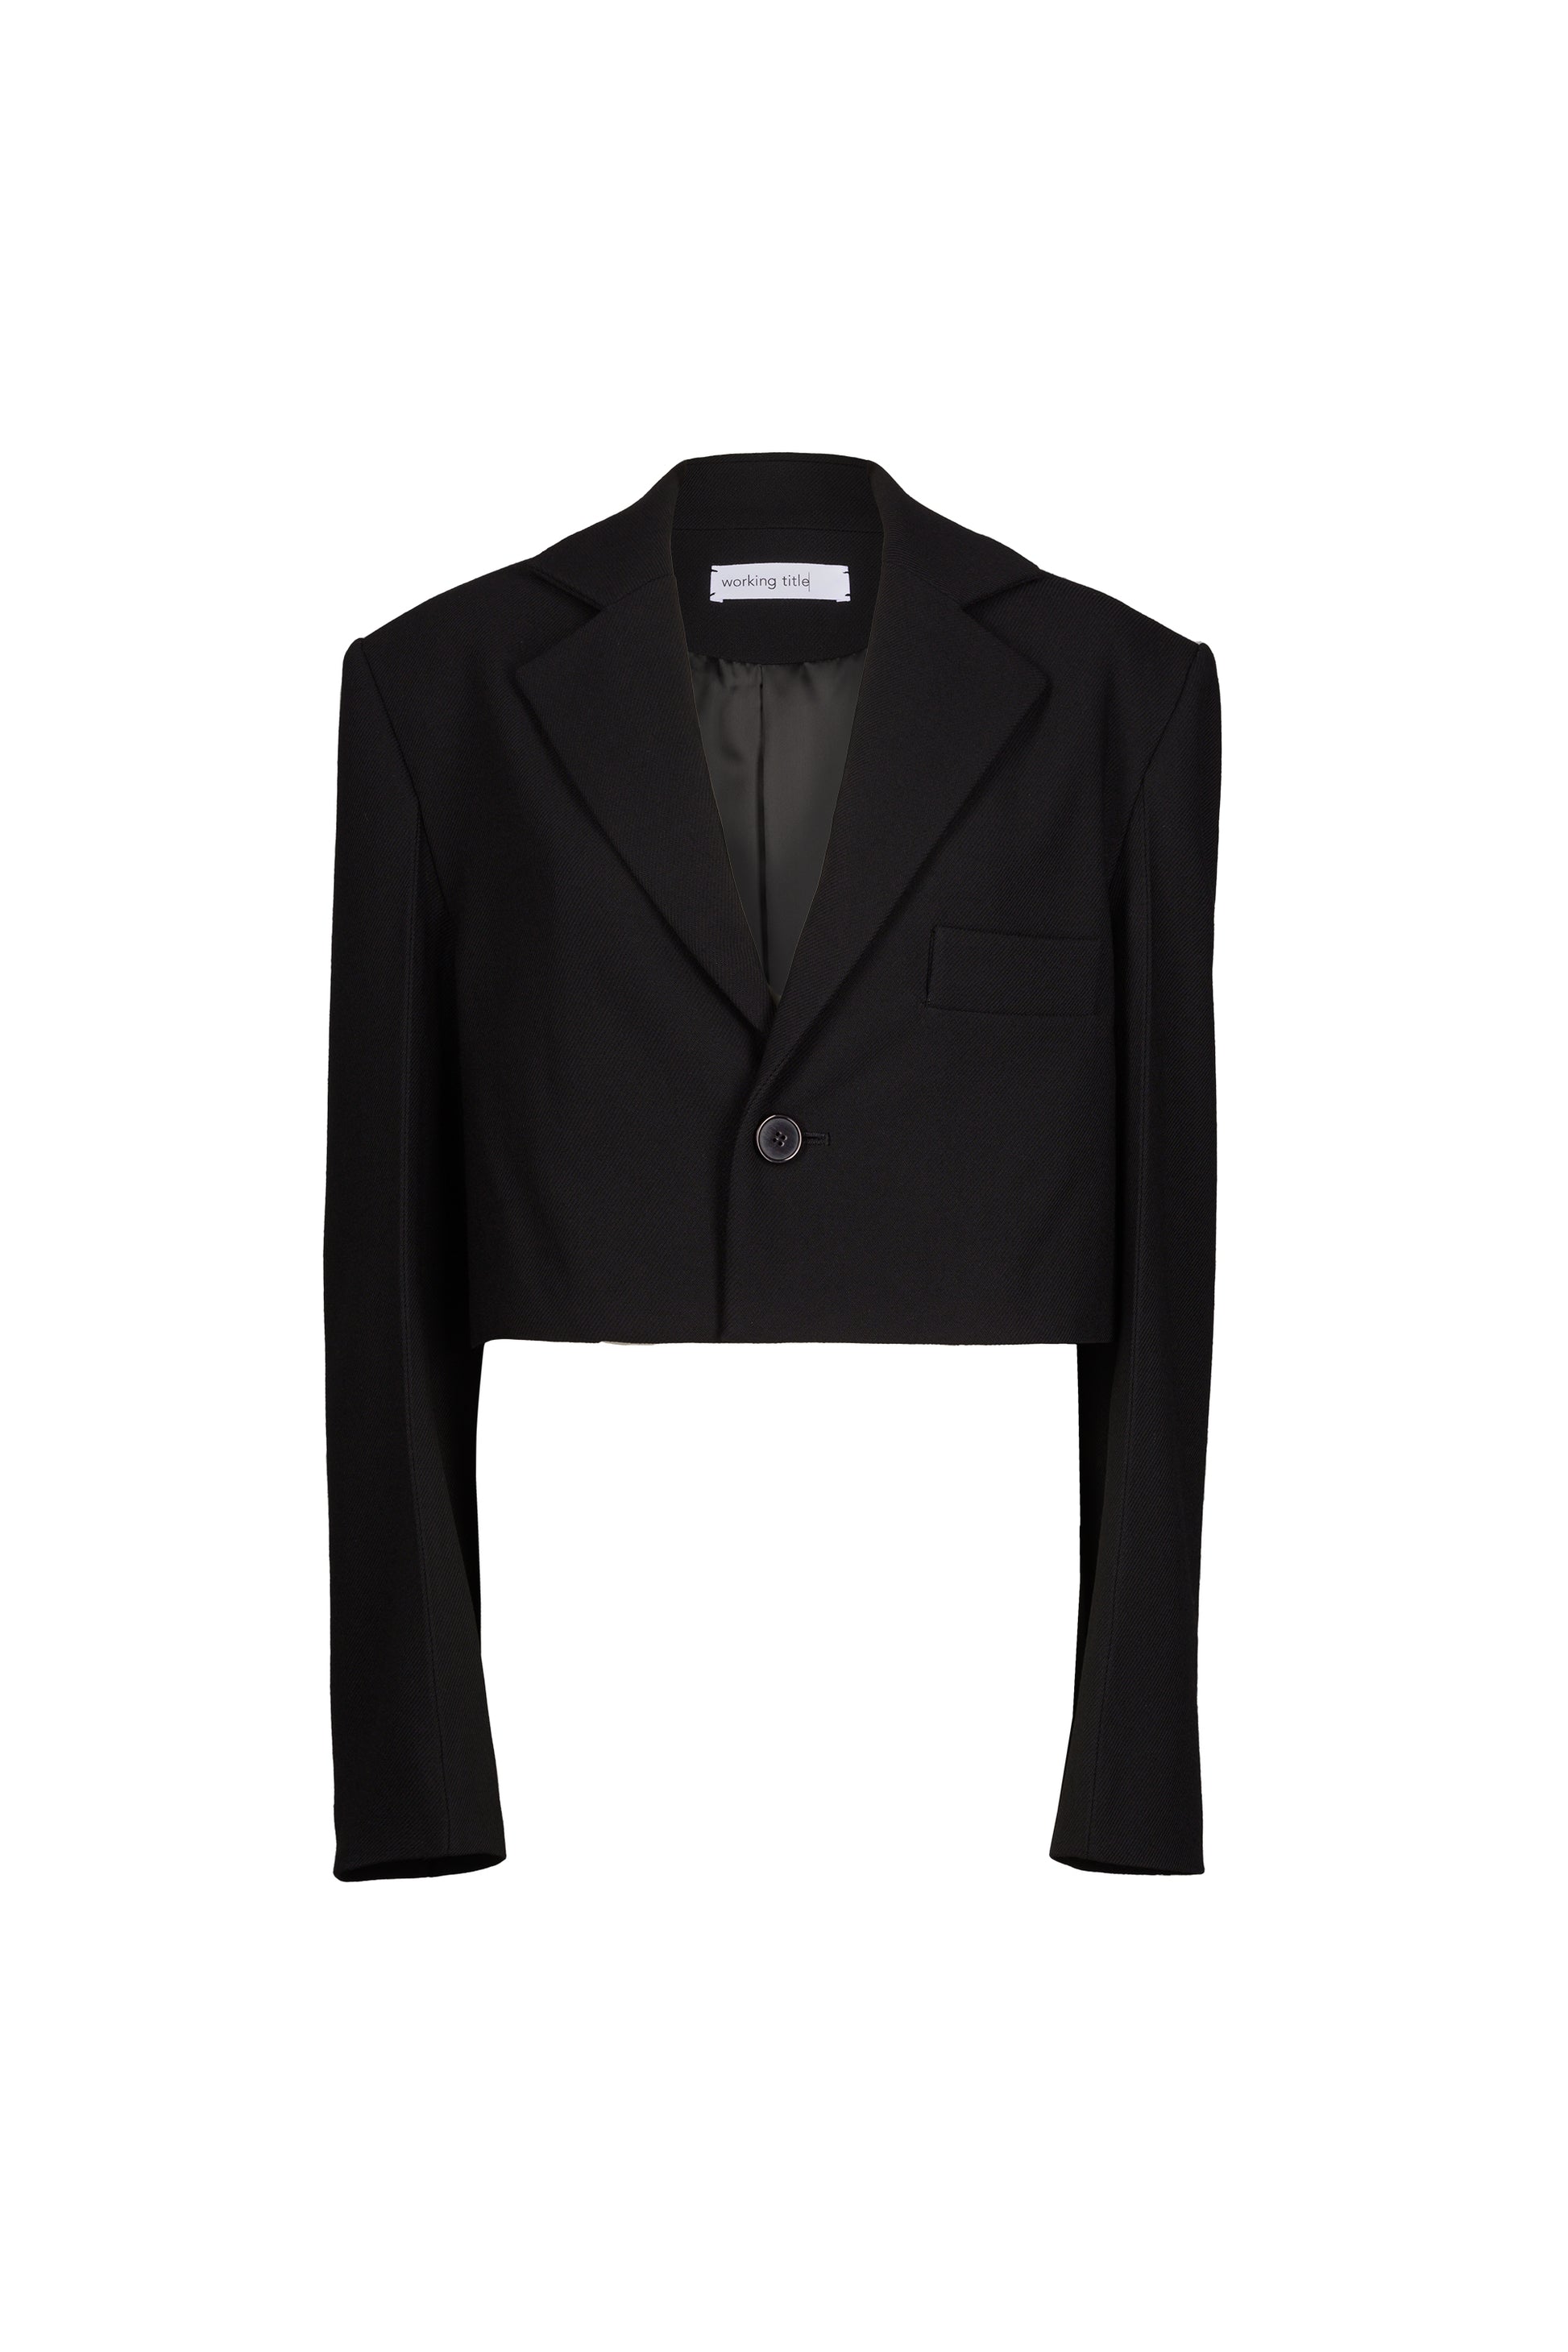 Stylish black cropped unisex blazer with a single-button closure and classic lapels, offering a modern twist on formal attire.